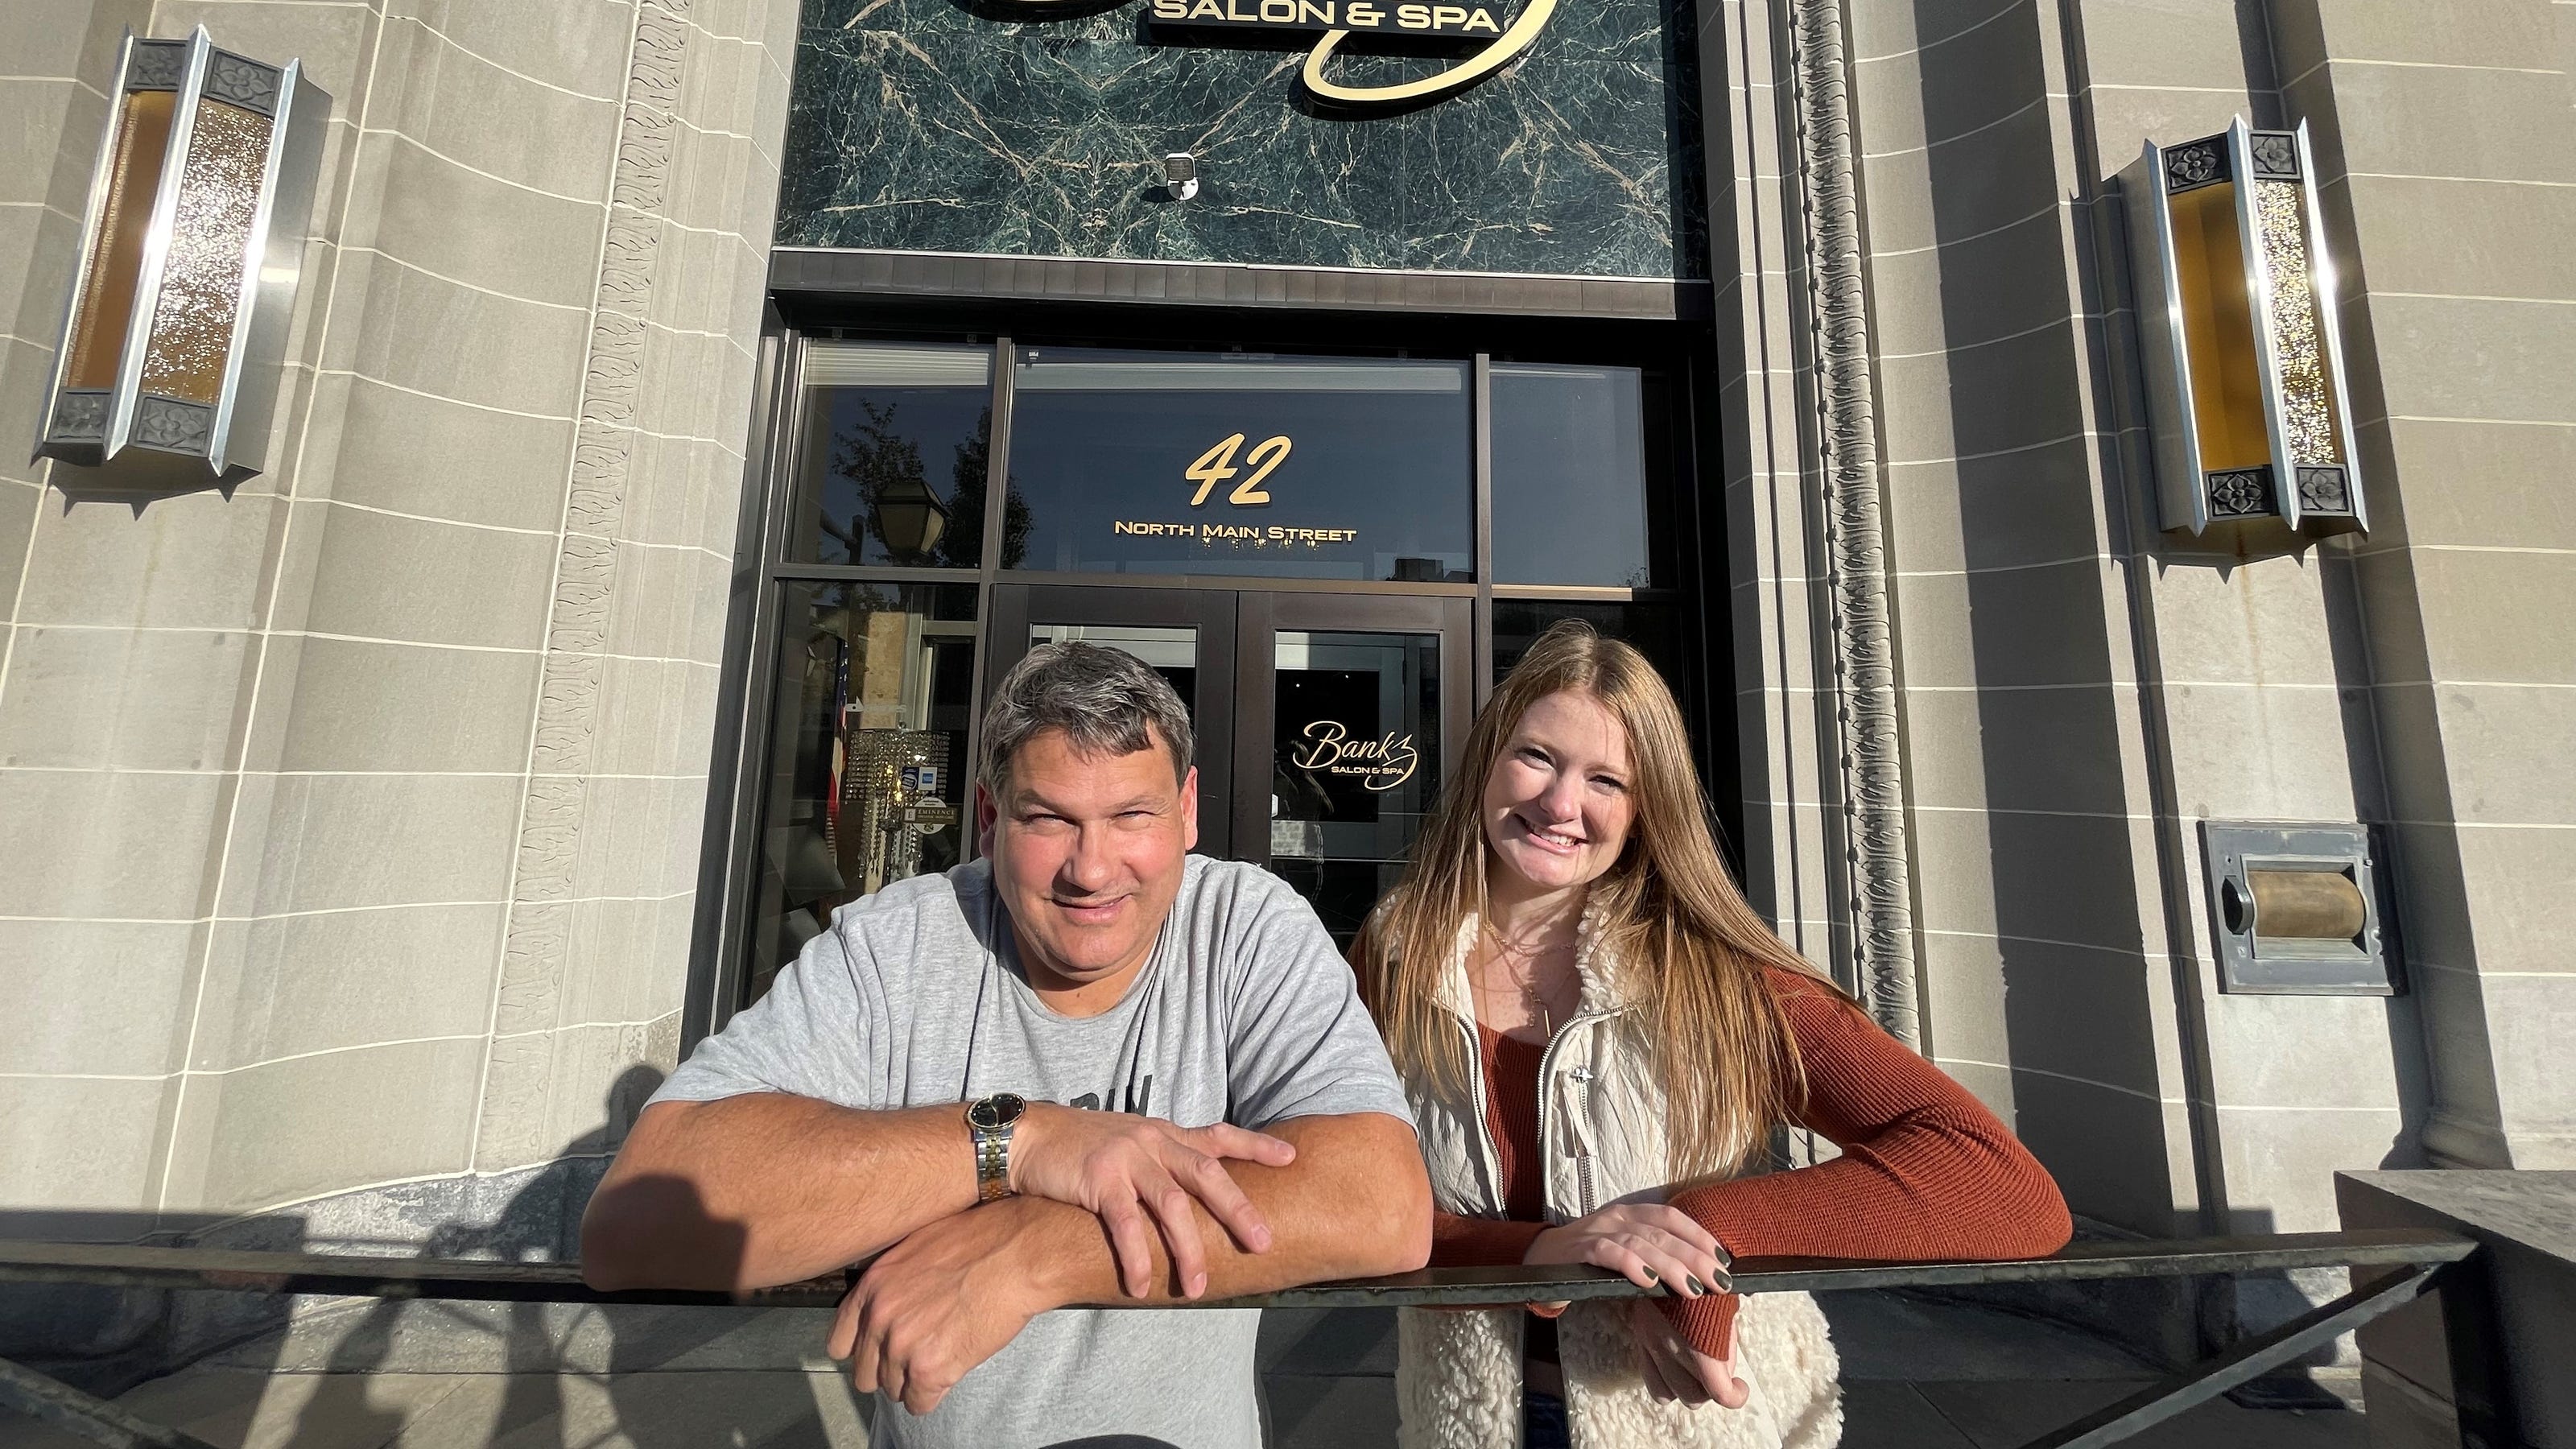 New owners of Bankz Salon to open Italian restaurant downtown